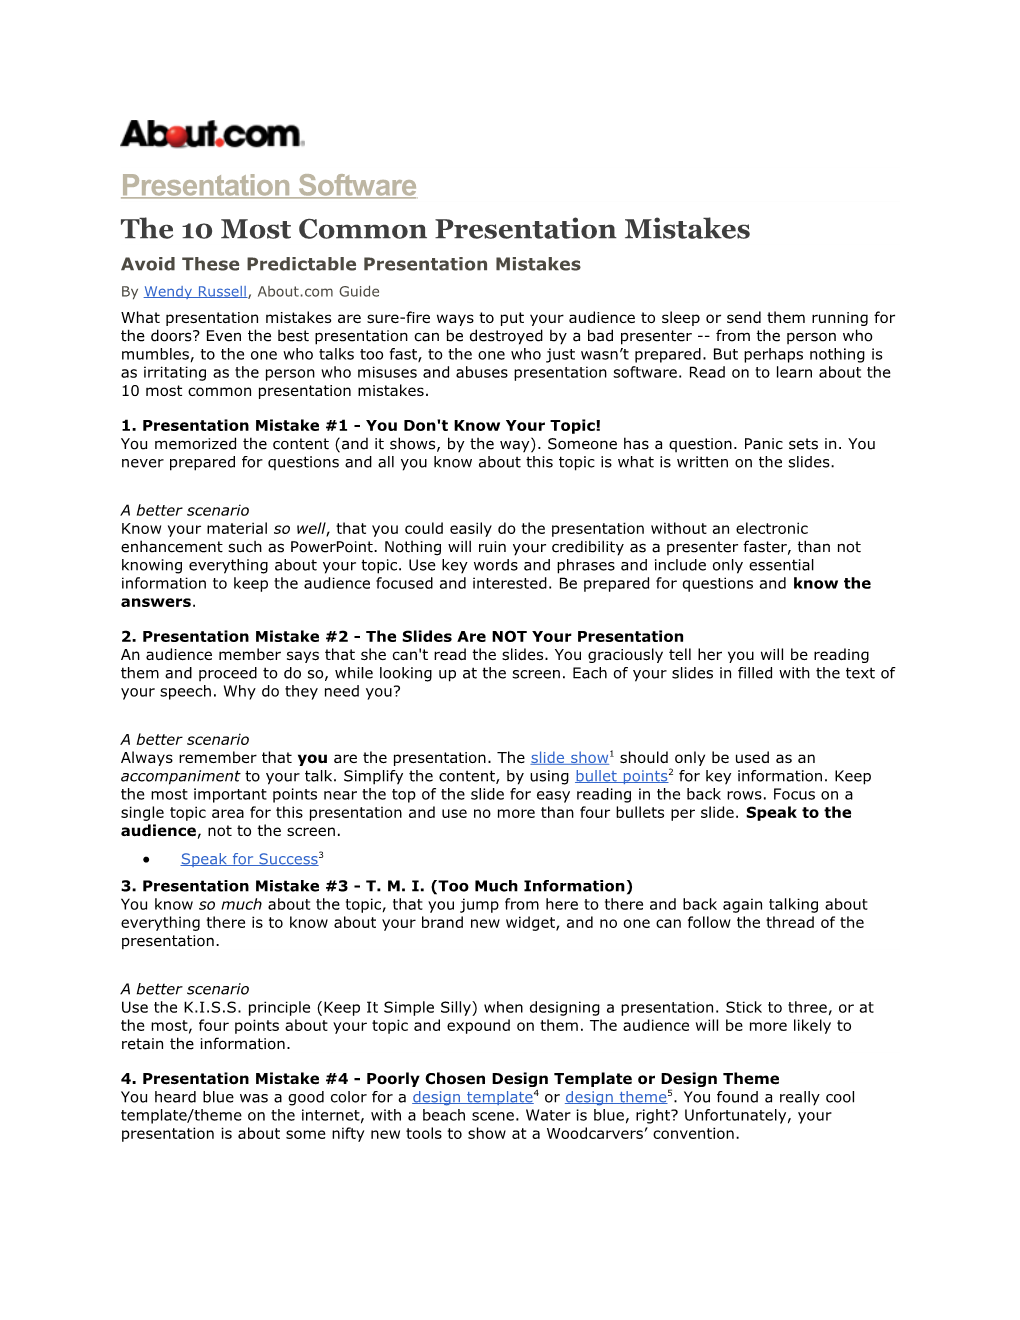 The 10 Most Common Presentationmistakes